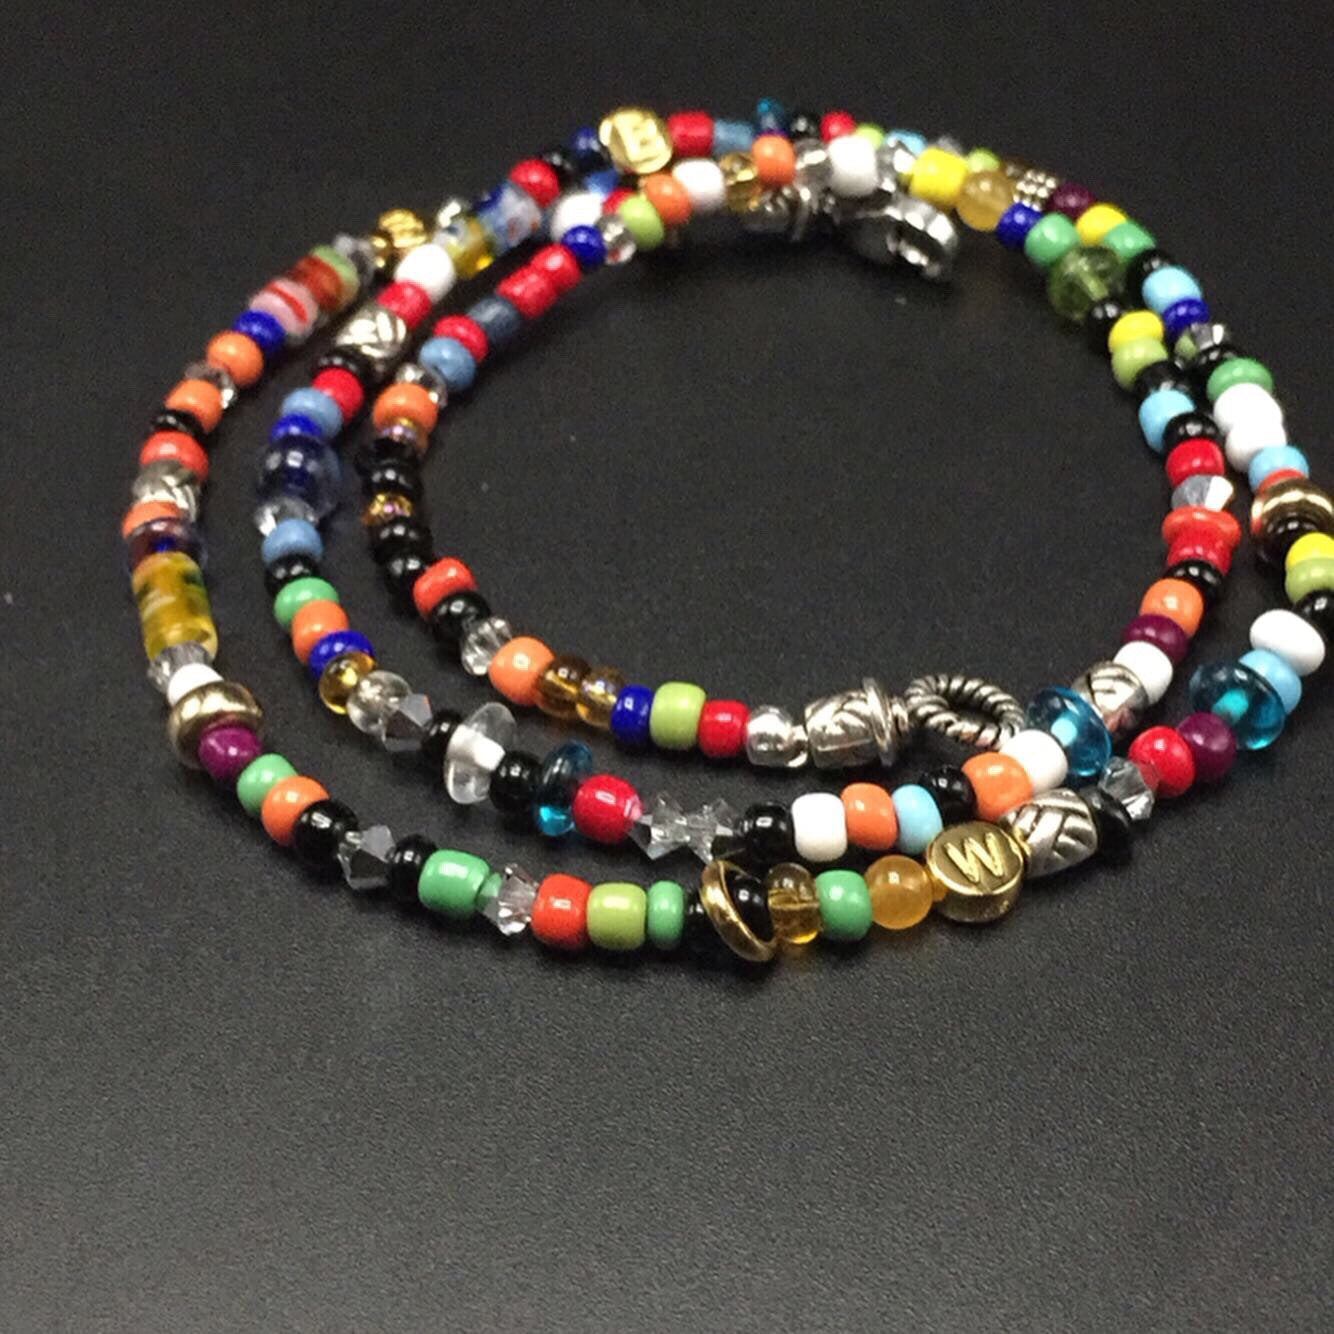 14 karat gold, sterling silver and Swarovski crystals with a playful mix of colored seed beads.